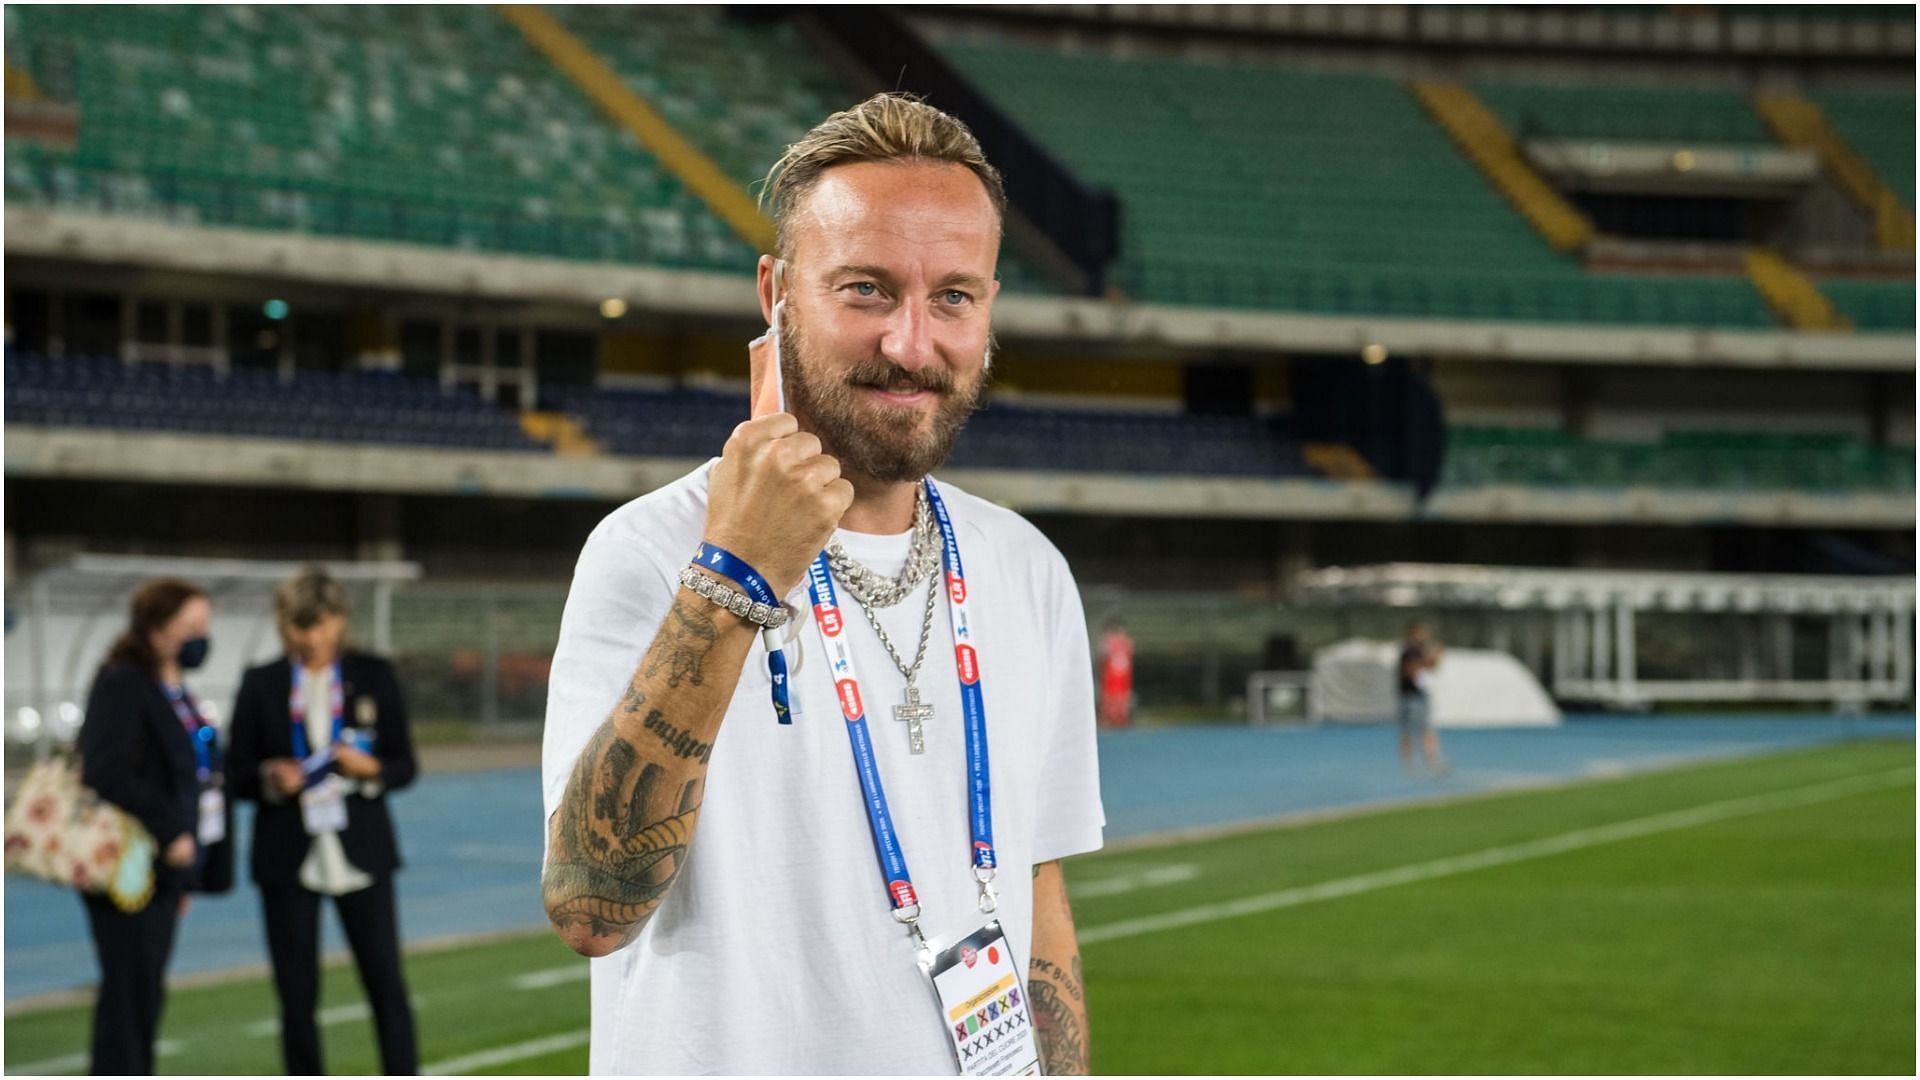 Francesco Facchinetti at the Match of the Heart live from the Bentegodi Stadium in Verona with the challenges of the teams led by Alessandra Amoroso, Massimo Giletti, Gianni Morandi and Salmo. (Image via Getty Images)